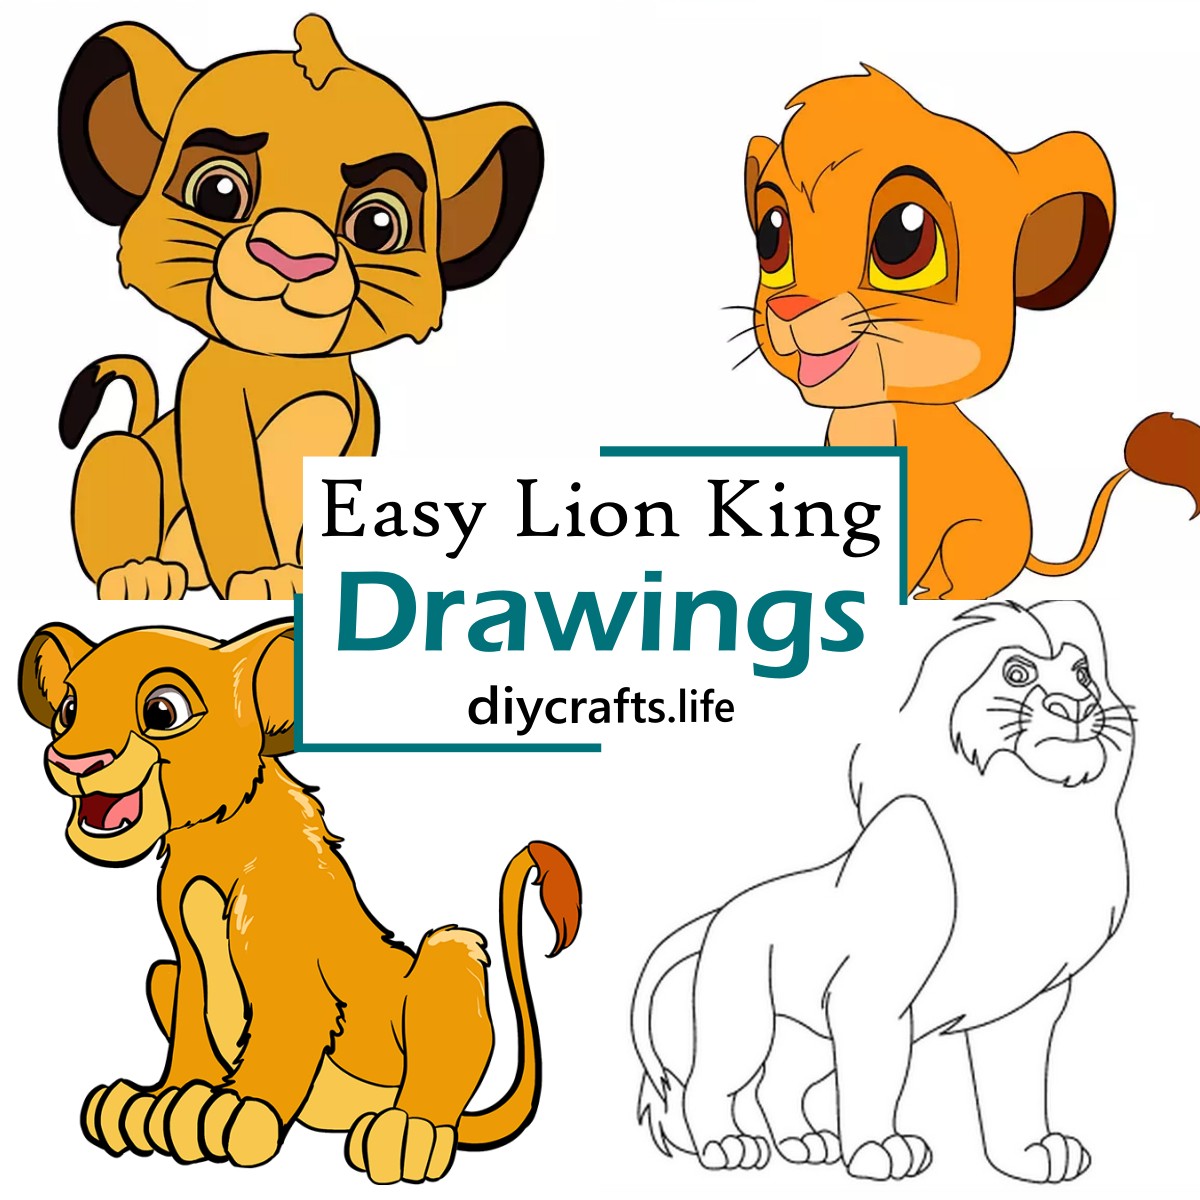 Lion King Simba Drawing Tutorial - How to draw Lion King Simba step by step